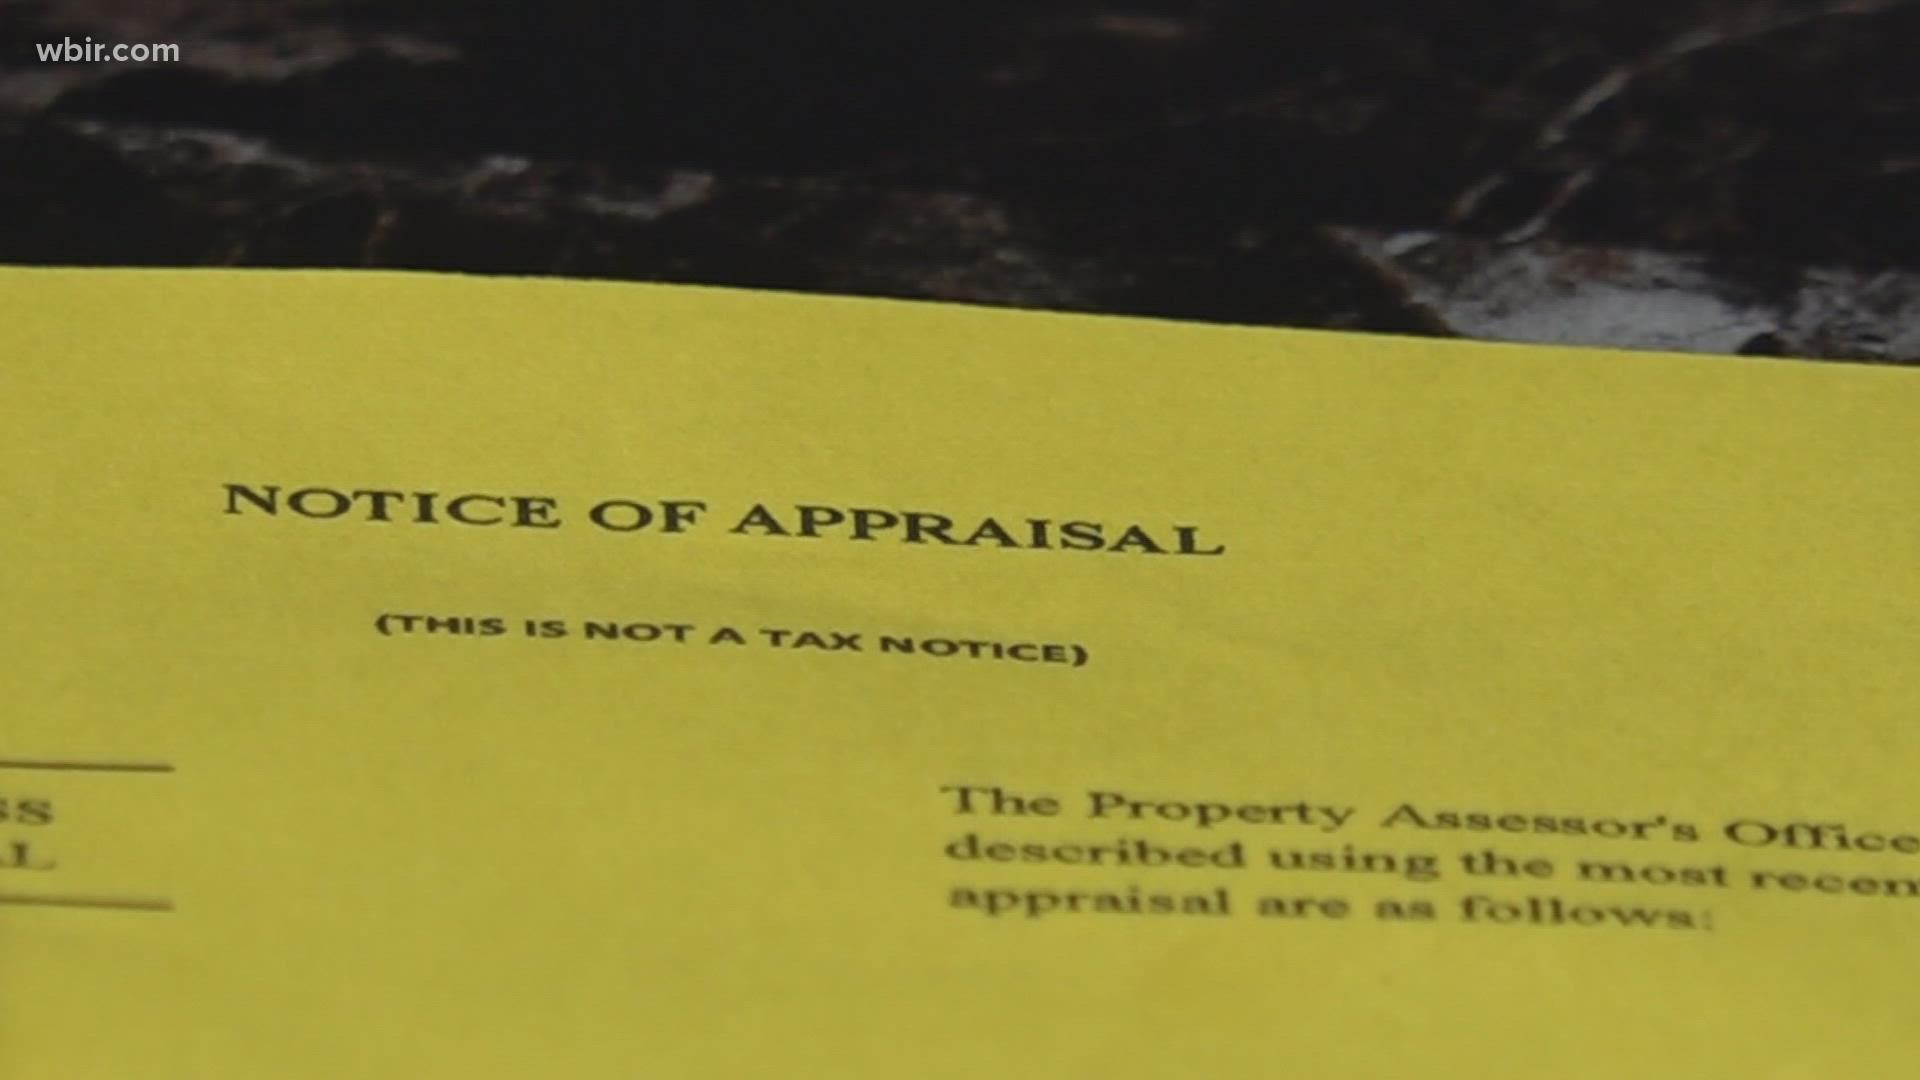 If you're one of the 180,000 people in Knox County who owns a home, you may have received a yellow letter in the mail with your home's new value.